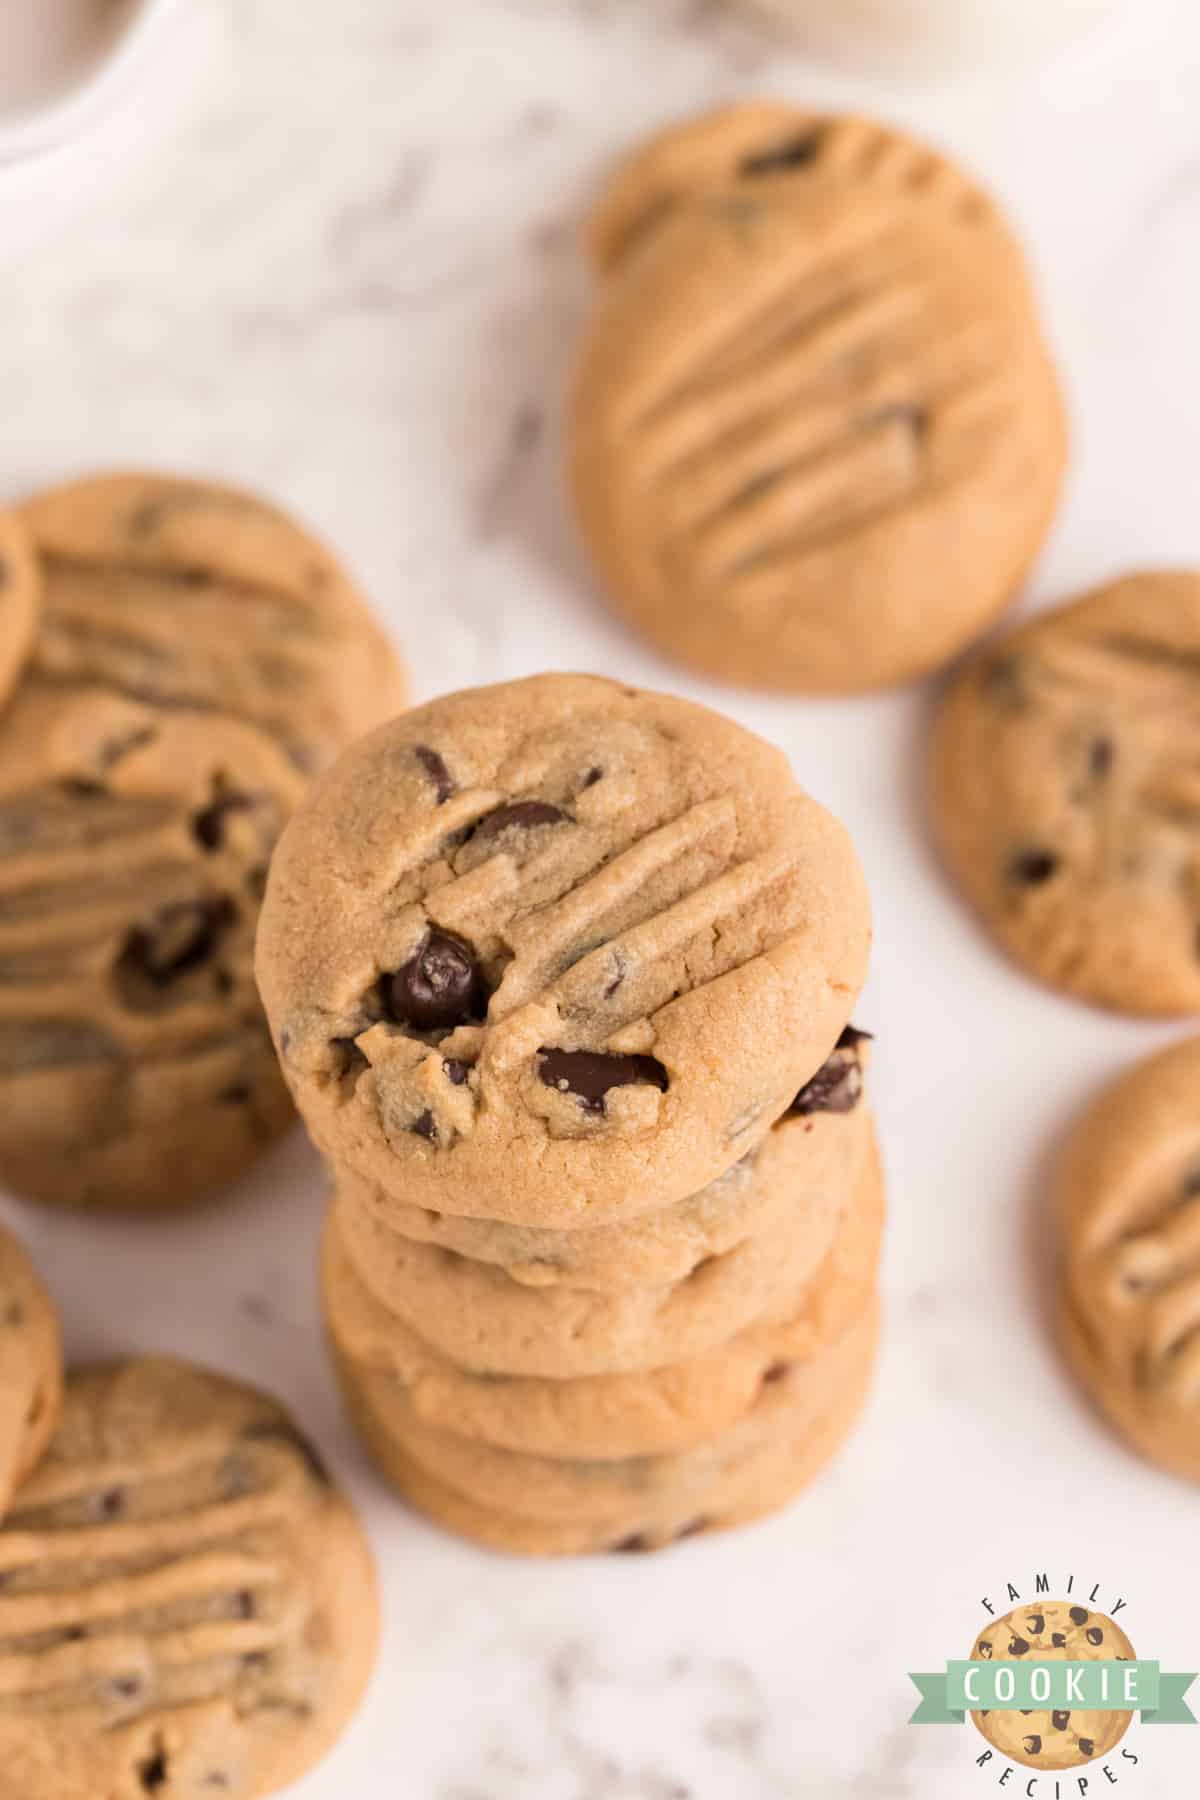 The BEST Peanut Butter Chocolate Chip Cookies are soft and chewy, and they turn out perfect every single time! Delicious peanut butter cookie recipe that is loaded with chocolate chips!